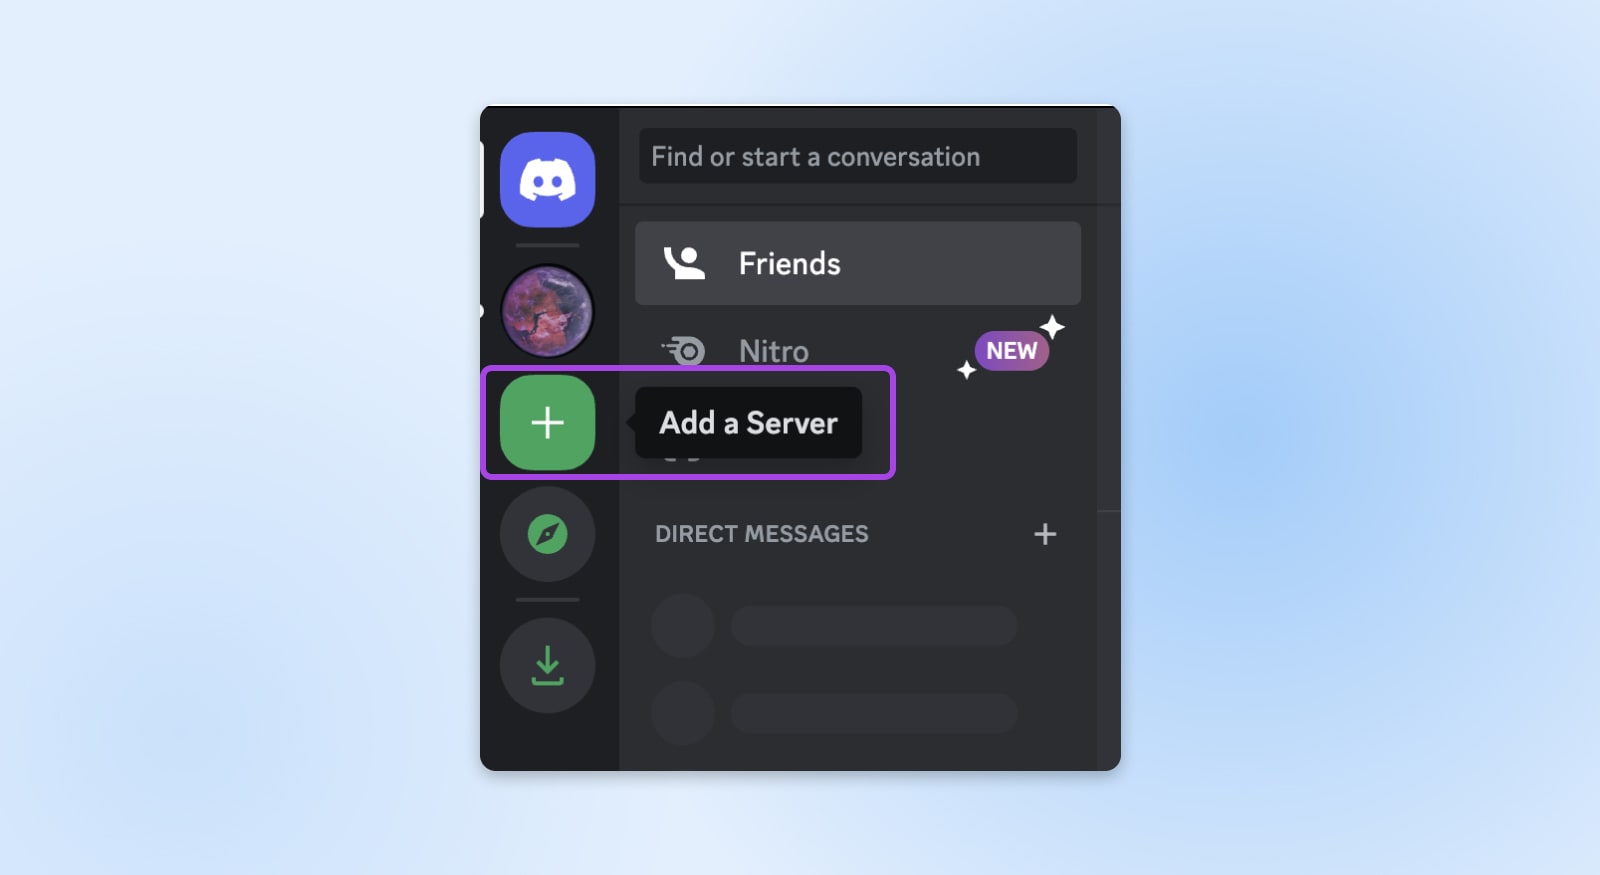 lefthand discord nav bar showing a green plus icon and the words "Add a Server" 